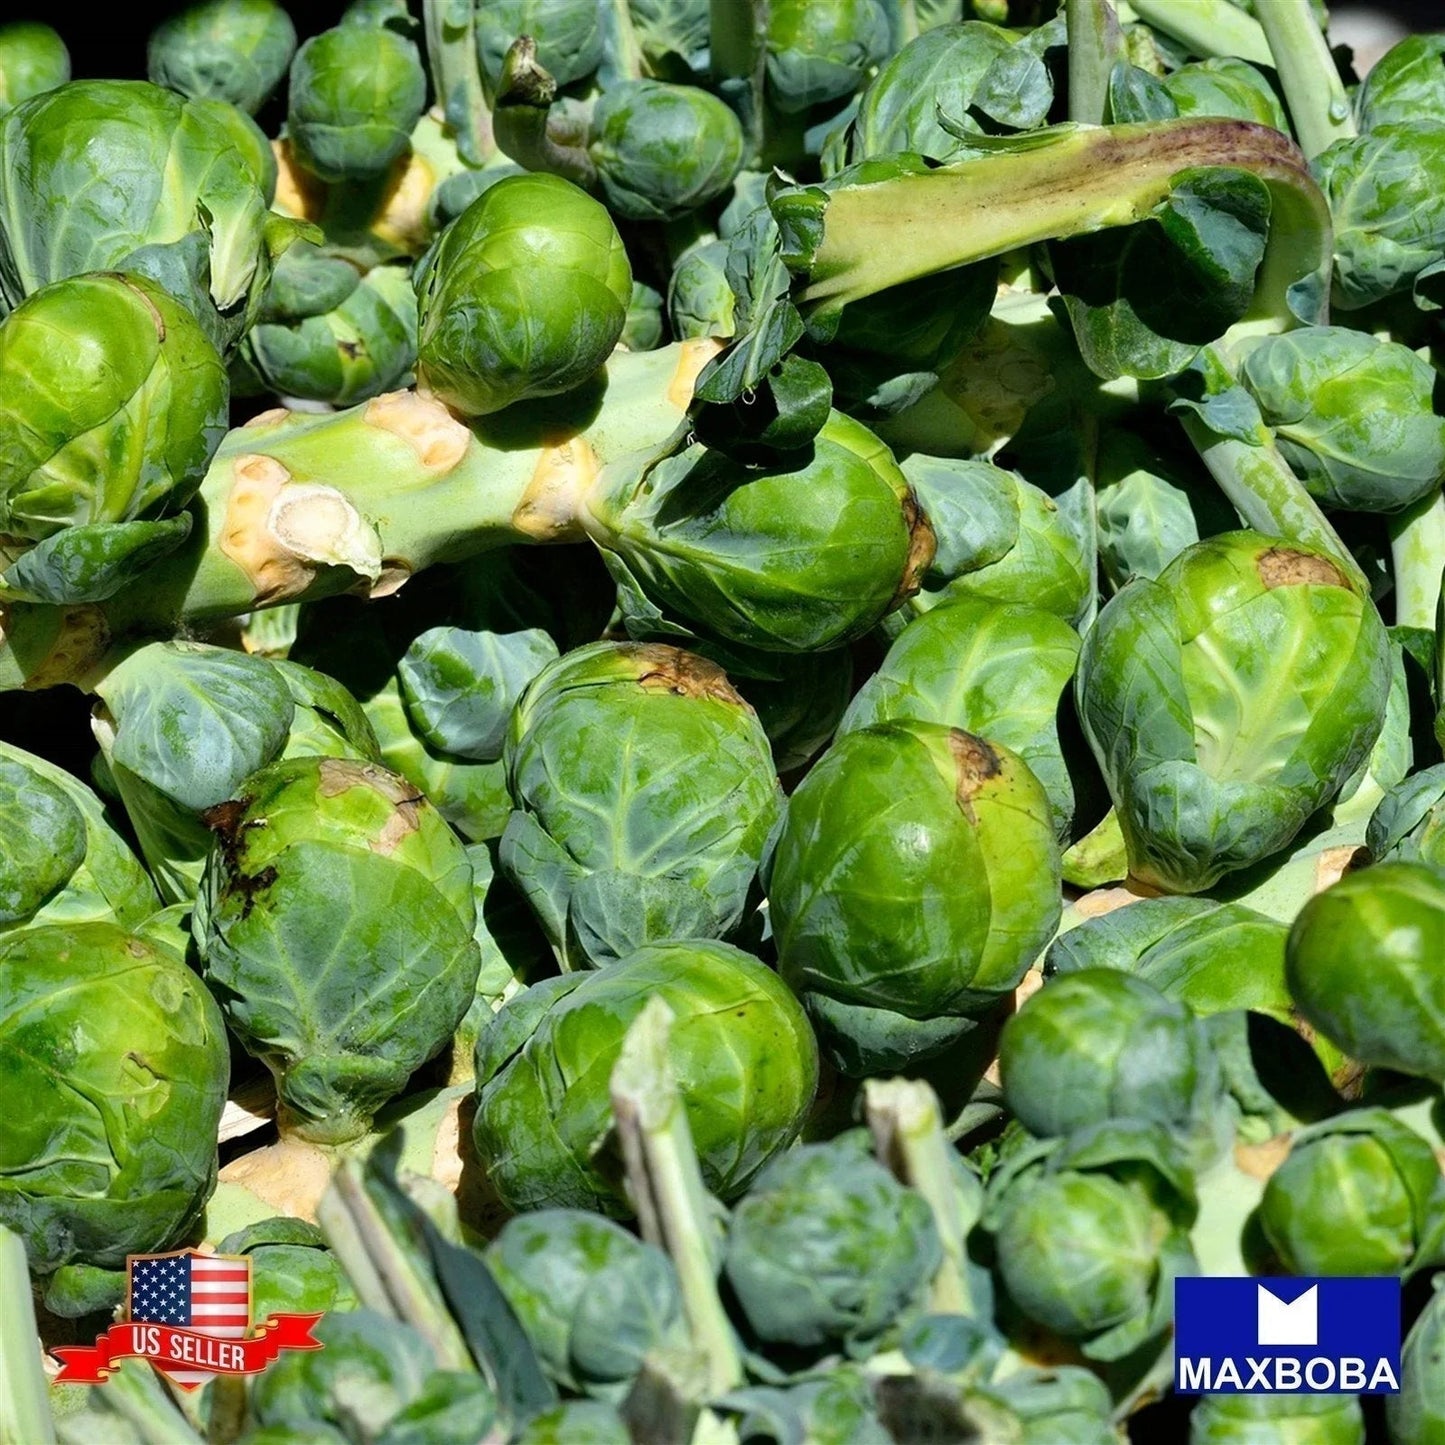 Brussels Sprouts Long Island Improved Seeds Heirloom Non-GMO